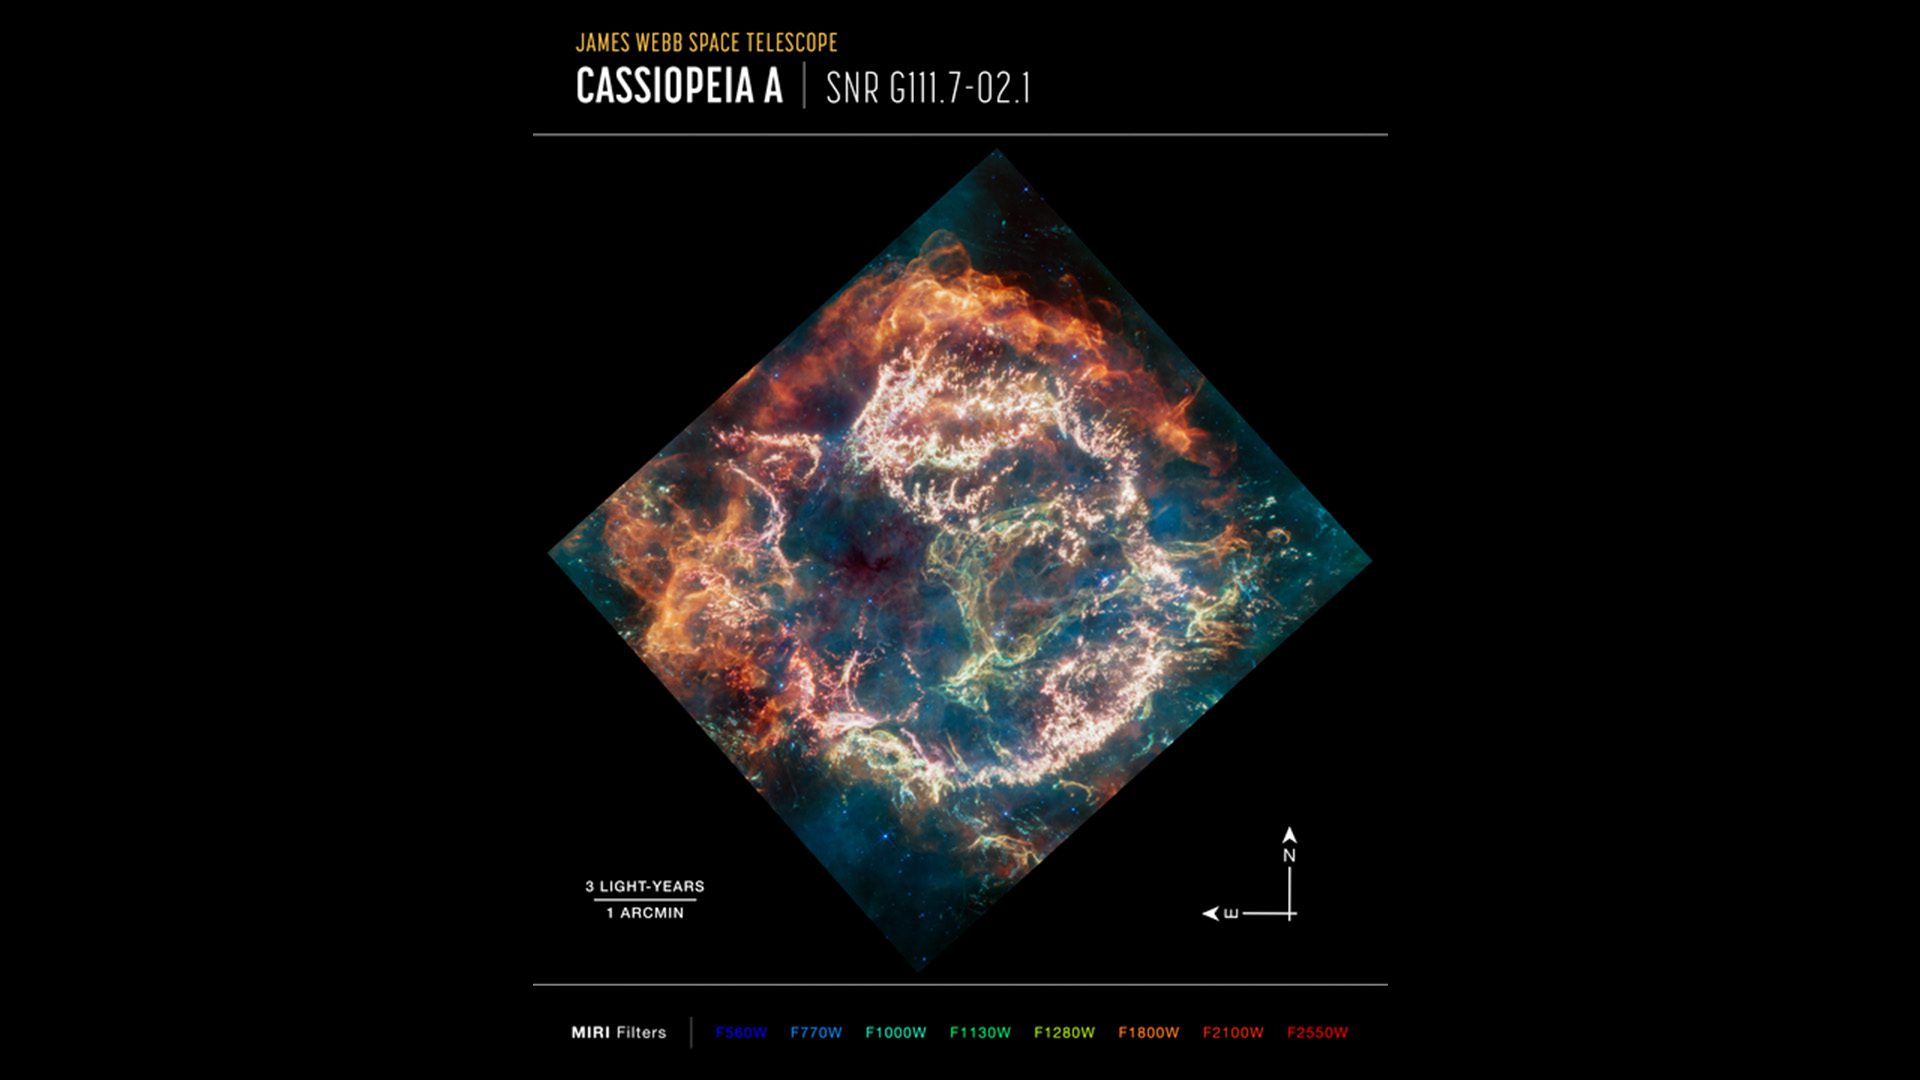 Cassiopeia A image from the James Webb Space Telescope